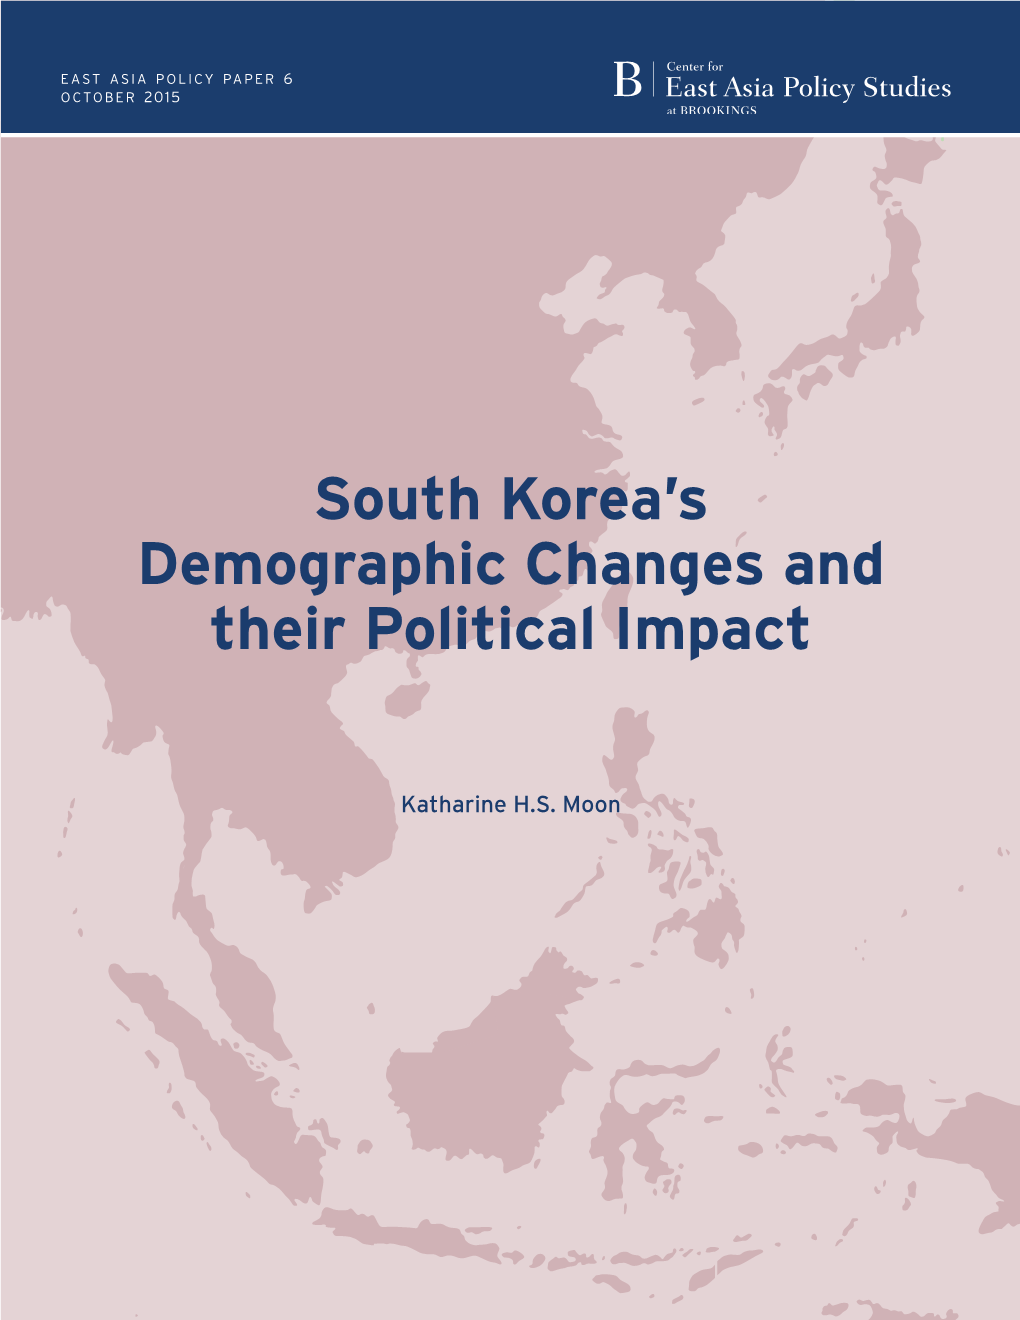 South Korea's Demographic Changes and Their Political Impact